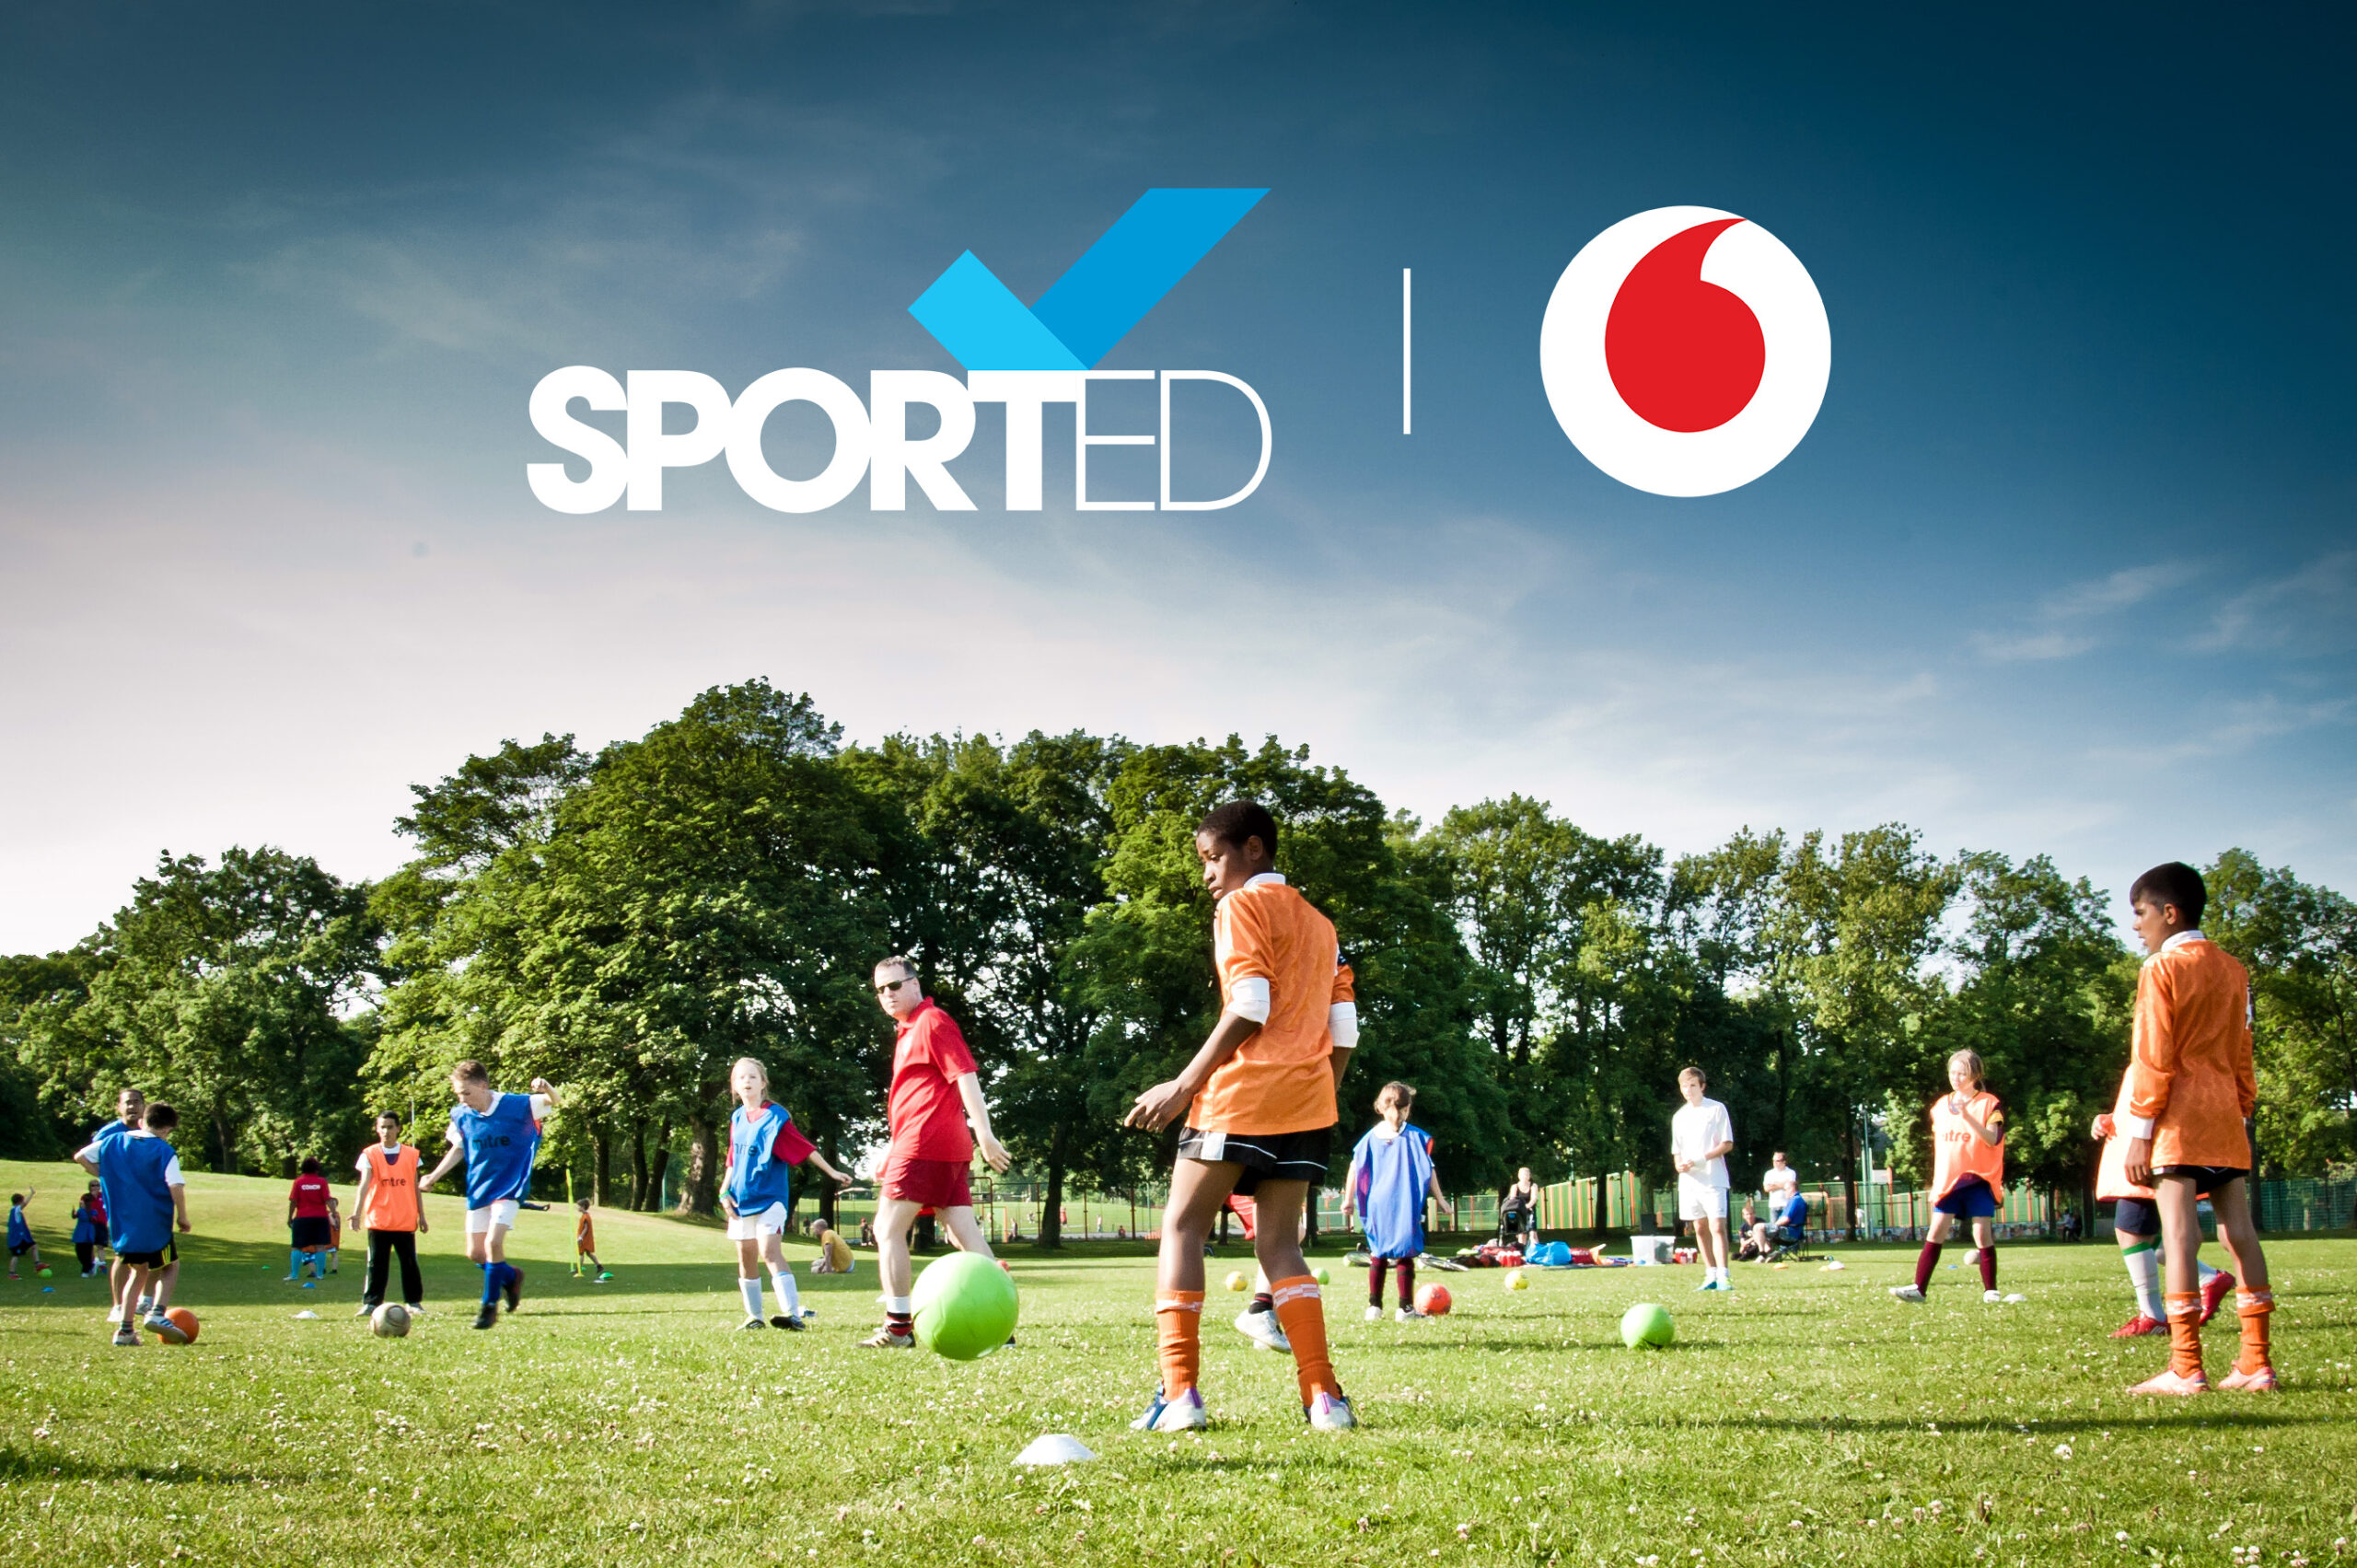 Vodafone teams up with Sported to tackle digital exclusion and support thousands of young people across the UK